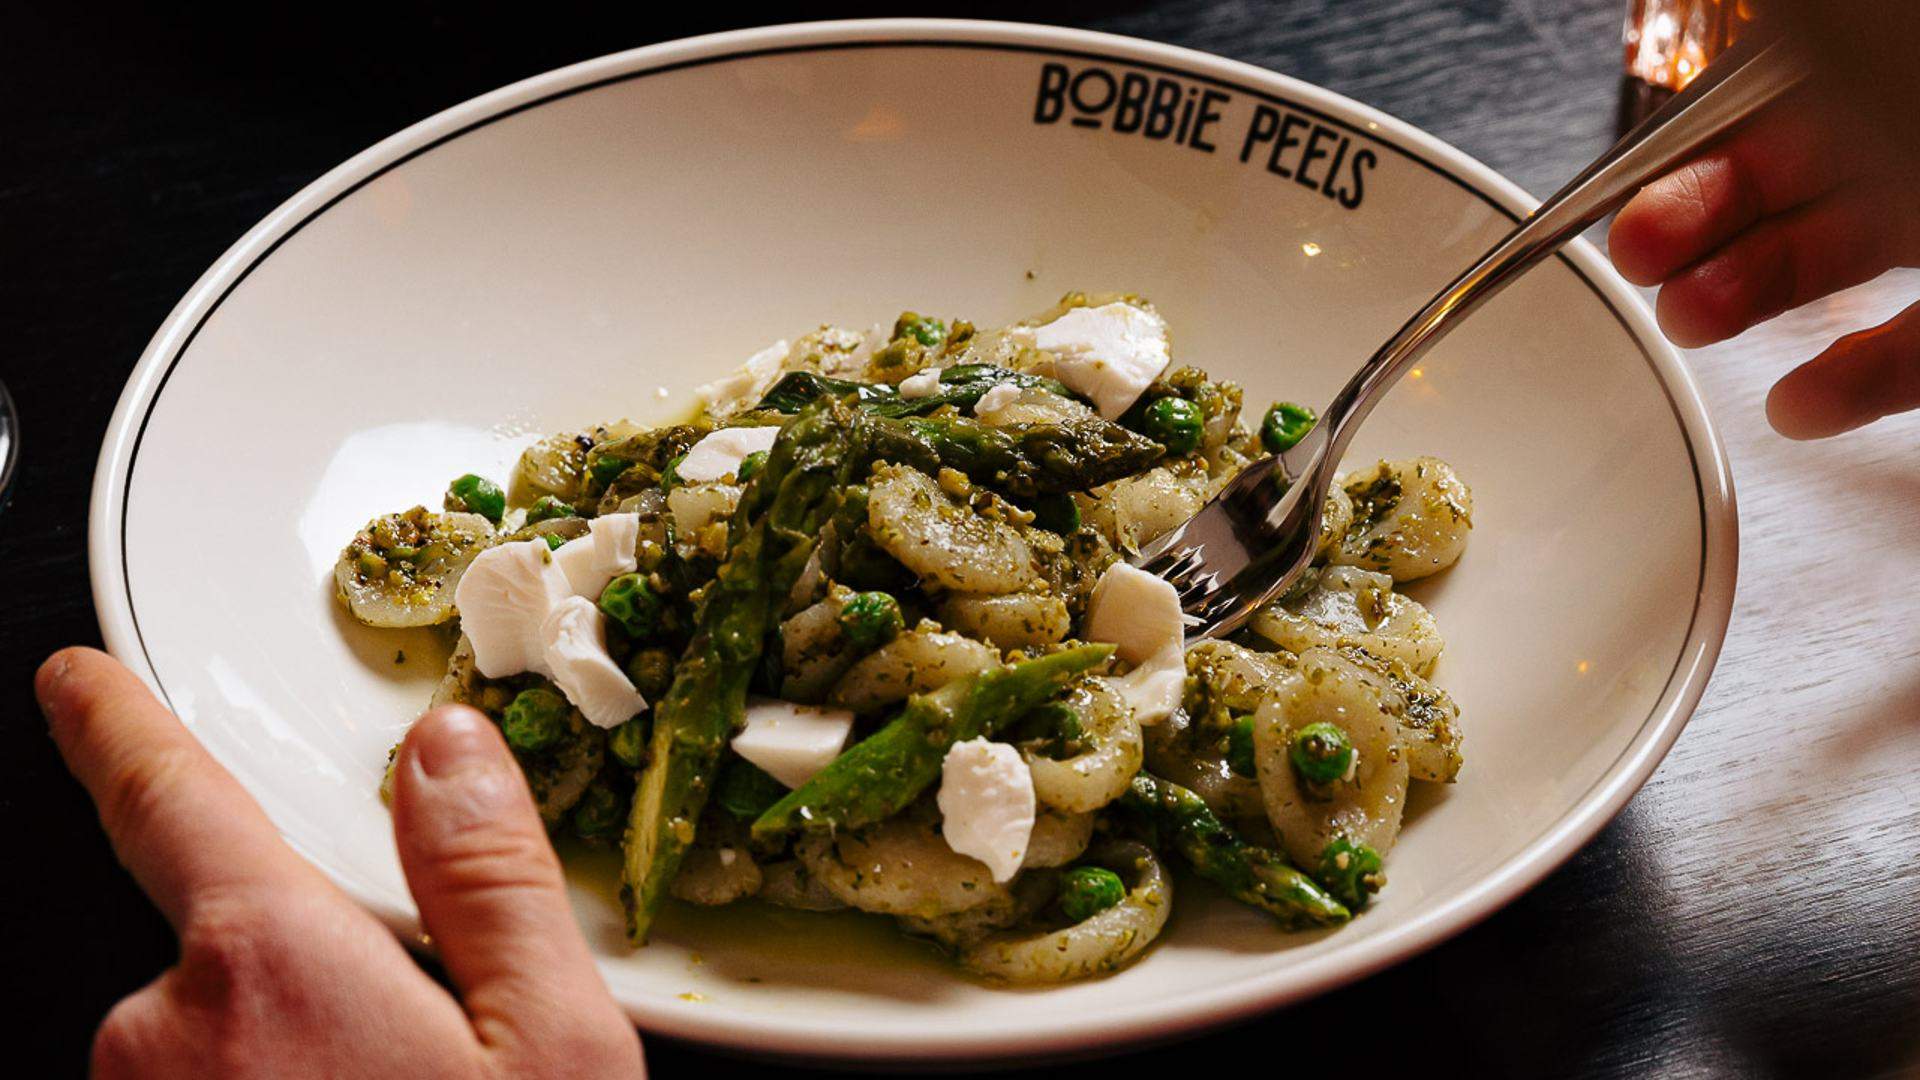 Bobbie Peels Is North Melbourne's Old-Meets-New Watering Hole From Two Familiar Hospo Names